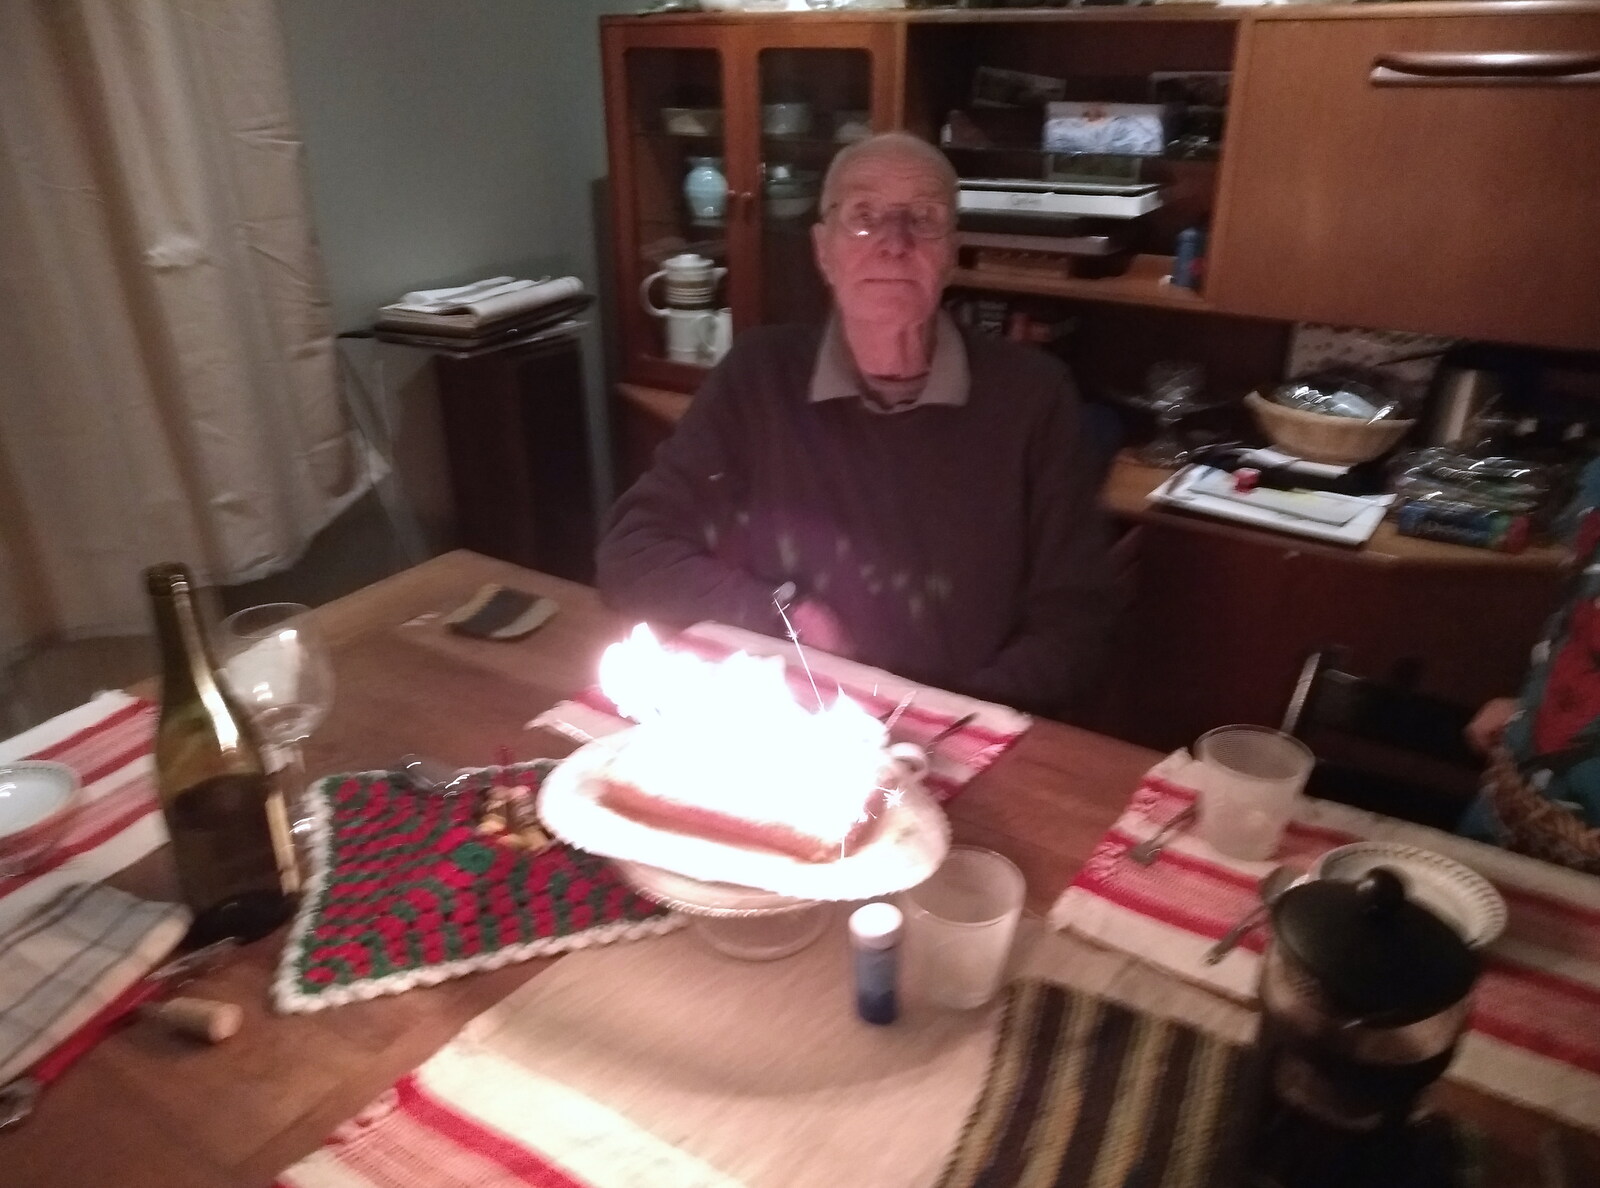 Grandad's cake from A Walk Around Eye, and the Return of Red Tent, Suffolk and London - 25th February 2018